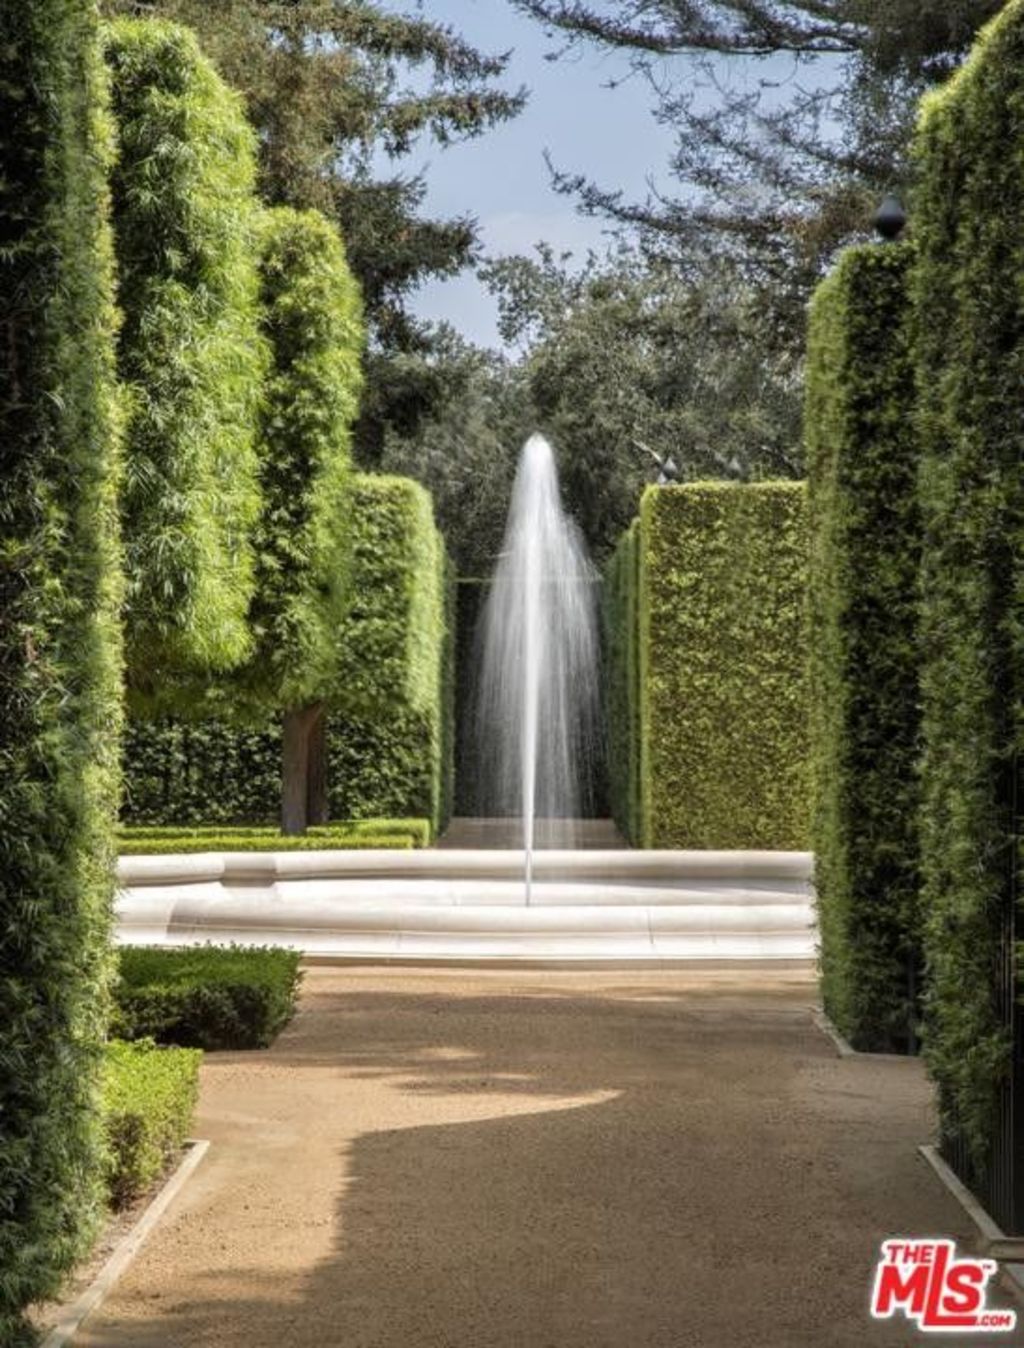 The Bel-Air estate was bought at an almost 60 per cent discount to its original asking price. Photo: Realtor.com